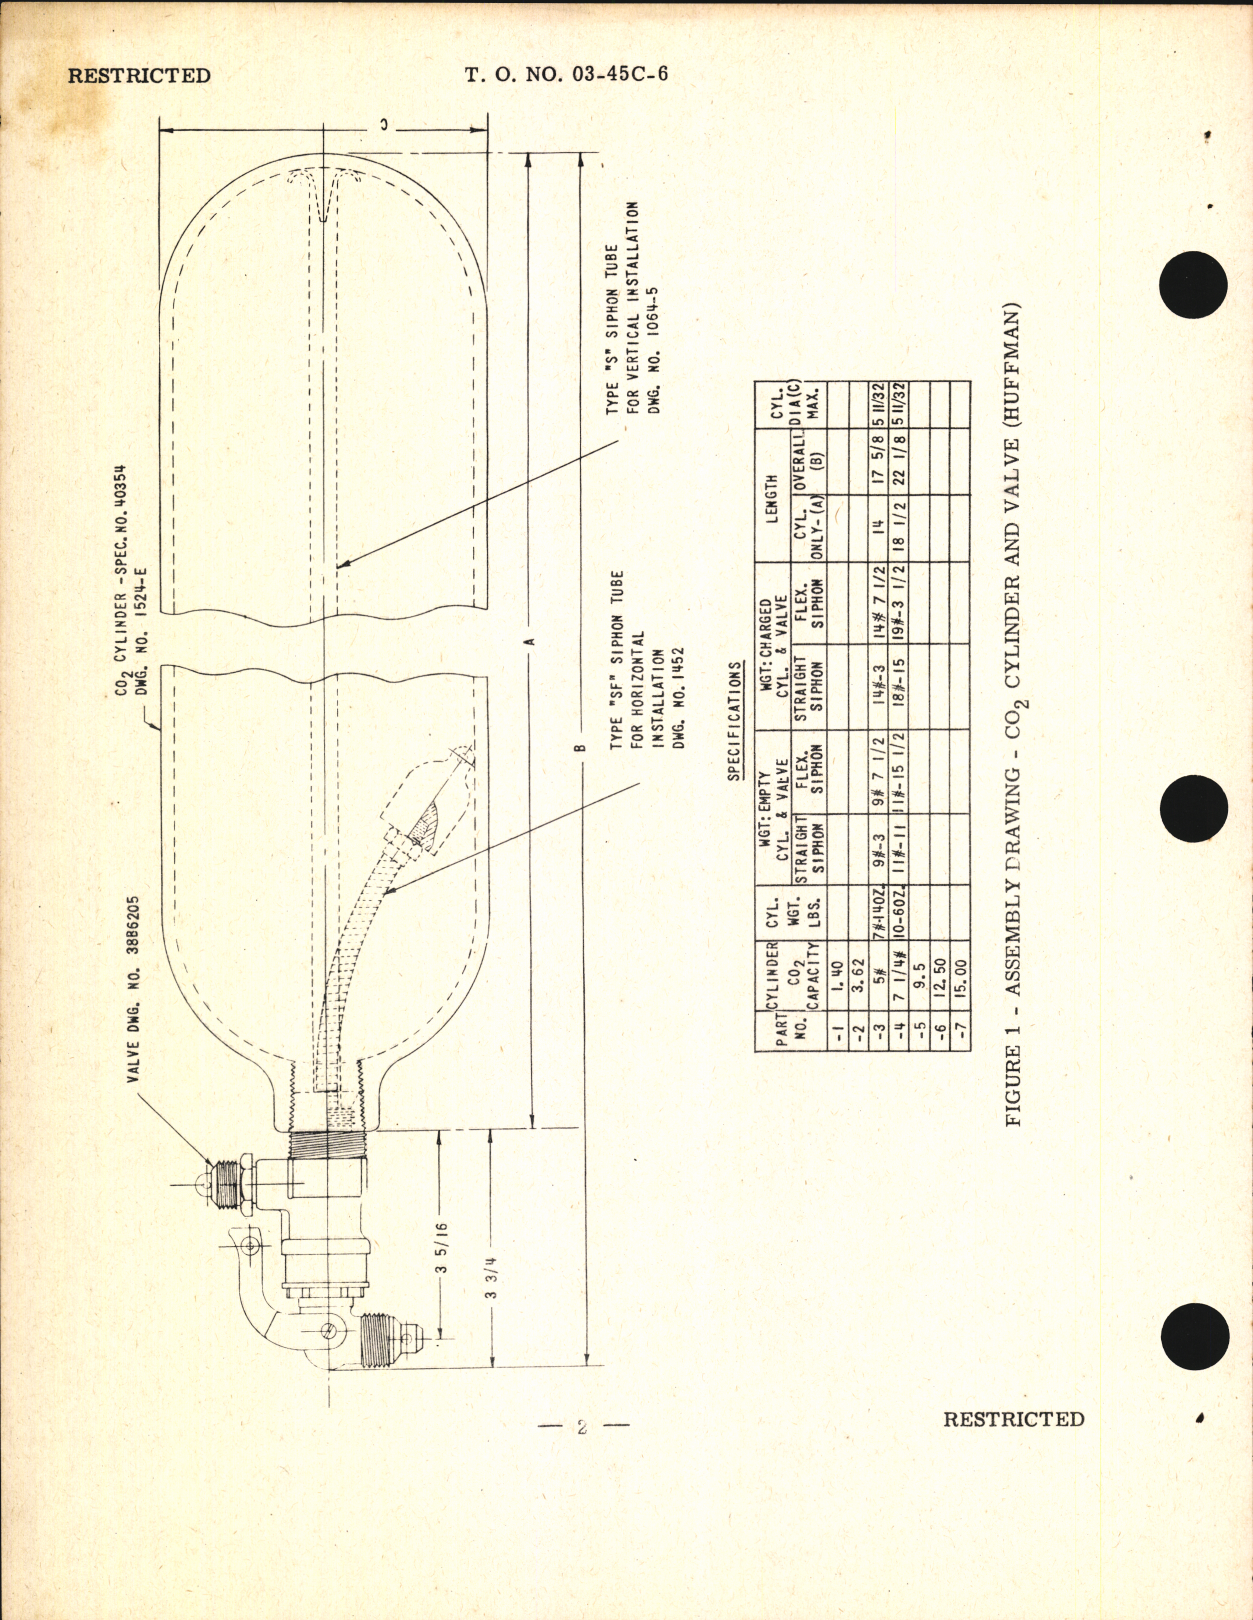 Sample page 4 from AirCorps Library document: Handbook of Instructions for Huffman CO2 Cylinder and Valve Assembly